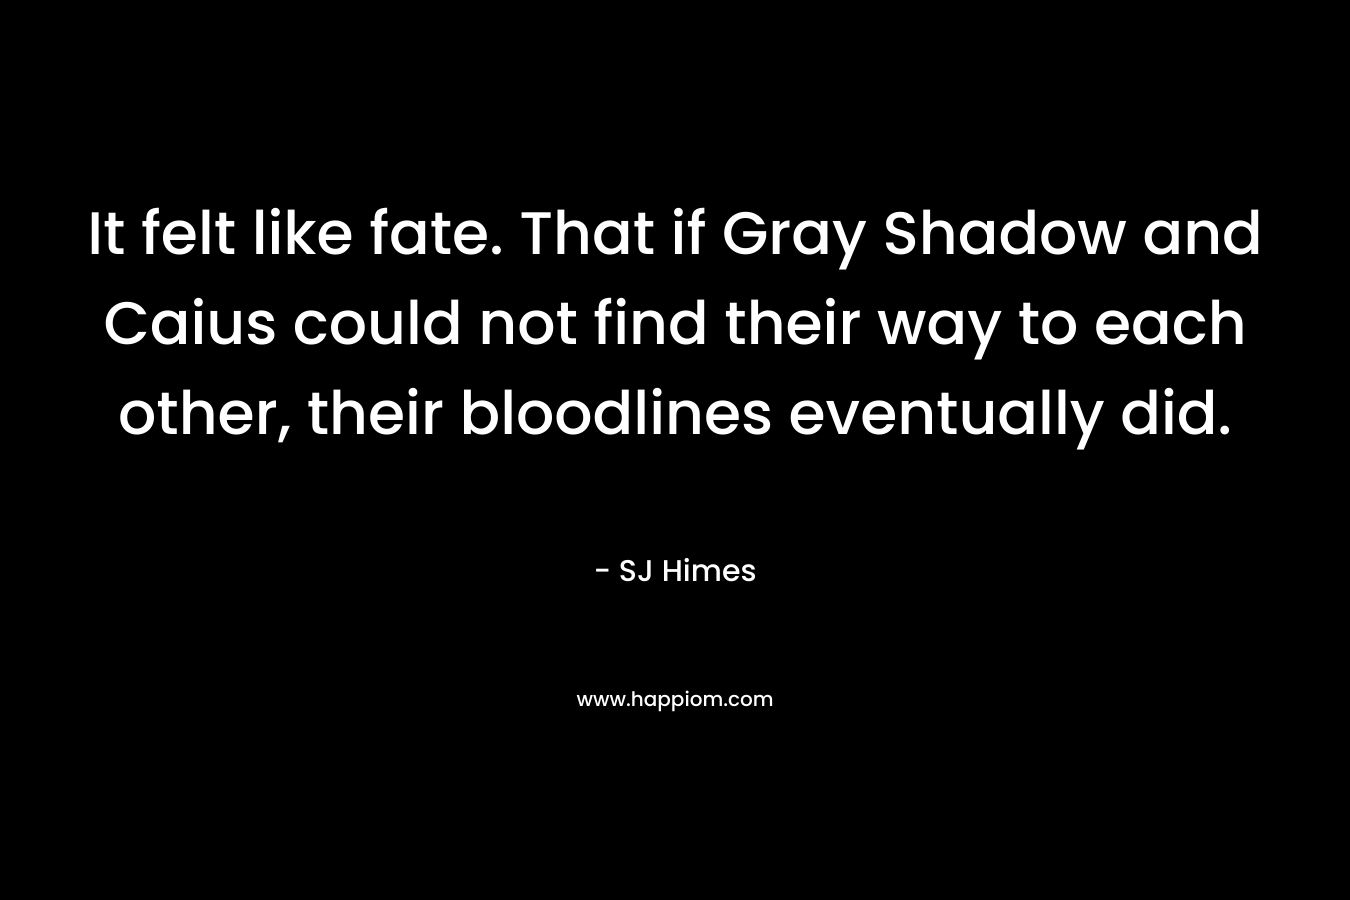 It felt like fate. That if Gray Shadow and Caius could not find their way to each other, their bloodlines eventually did.